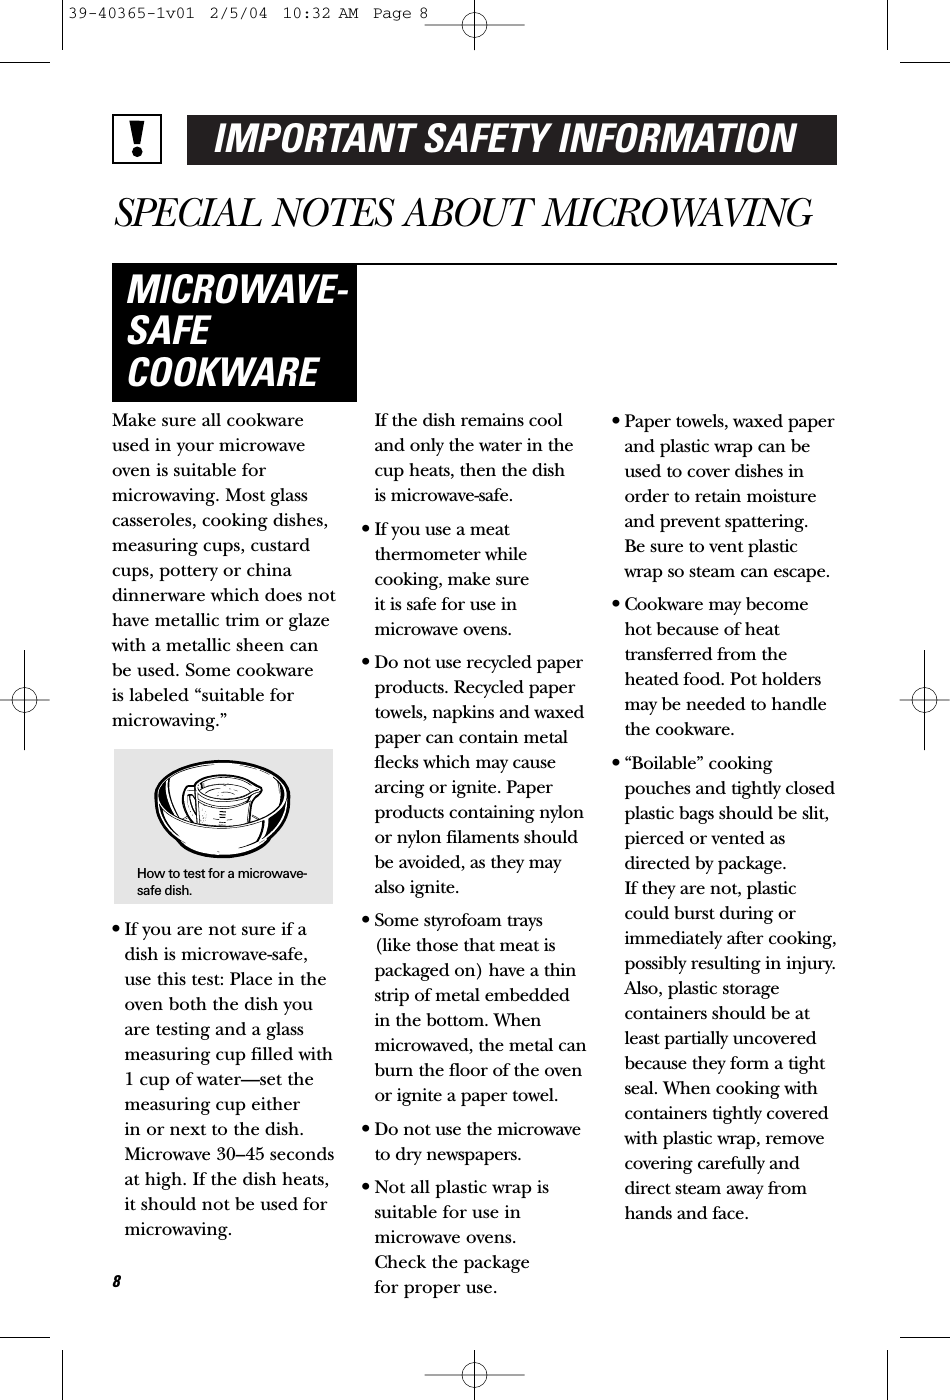 IMPORTANT SAFETY INFORMATIONSPECIAL NOTES ABOUT MICROWAVINGMake sure all cookwareused in your microwaveoven is suitable formicrowaving. Most glasscasseroles, cooking dishes,measuring cups, custardcups, pottery or chinadinnerware which does nothave metallic trim or glazewith a metallic sheen canbe used. Some cookware is labeled “suitable formicrowaving.”•If you are not sure if adish is microwave-safe,use this test: Place in theoven both the dish youare testing and a glassmeasuring cup filled with1 cup of water—set themeasuring cup either in or next to the dish.Microwave 30–45 secondsat high. If the dish heats,it should not be used formicrowaving. If the dish remains cooland only the water in thecup heats, then the dish is microwave-safe.•If you use a meatthermometer whilecooking, make sure it is safe for use inmicrowave ovens.•Do not use recycled paperproducts. Recycled papertowels, napkins and waxedpaper can contain metalflecks which may causearcing or ignite. Paperproducts containing nylonor nylon filaments shouldbe avoided, as they mayalso ignite. •Some styrofoam trays (like those that meat ispackaged on) have a thinstrip of metal embeddedin the bottom. Whenmicrowaved, the metal canburn the floor of the ovenor ignite a paper towel.•Do not use the microwaveto dry newspapers.•Not all plastic wrap issuitable for use inmicrowave ovens. Check the package for proper use.•Paper towels, waxed paperand plastic wrap can beused to cover dishes inorder to retain moistureand prevent spattering. Be sure to vent plasticwrap so steam can escape.•Cookware may becomehot because of heattransferred from theheated food. Pot holdersmay be needed to handlethe cookware.•“Boilable” cookingpouches and tightly closedplastic bags should be slit,pierced or vented asdirected by package. If they are not, plasticcould burst during orimmediately after cooking,possibly resulting in injury.Also, plastic storagecontainers should be atleast partially uncoveredbecause they form a tightseal. When cooking withcontainers tightly coveredwith plastic wrap, removecovering carefully anddirect steam away fromhands and face.MICROWAVE-SAFECOOKWAREHow to test for a microwave-safe dish.839-40365-1v01  2/5/04  10:32 AM  Page 8